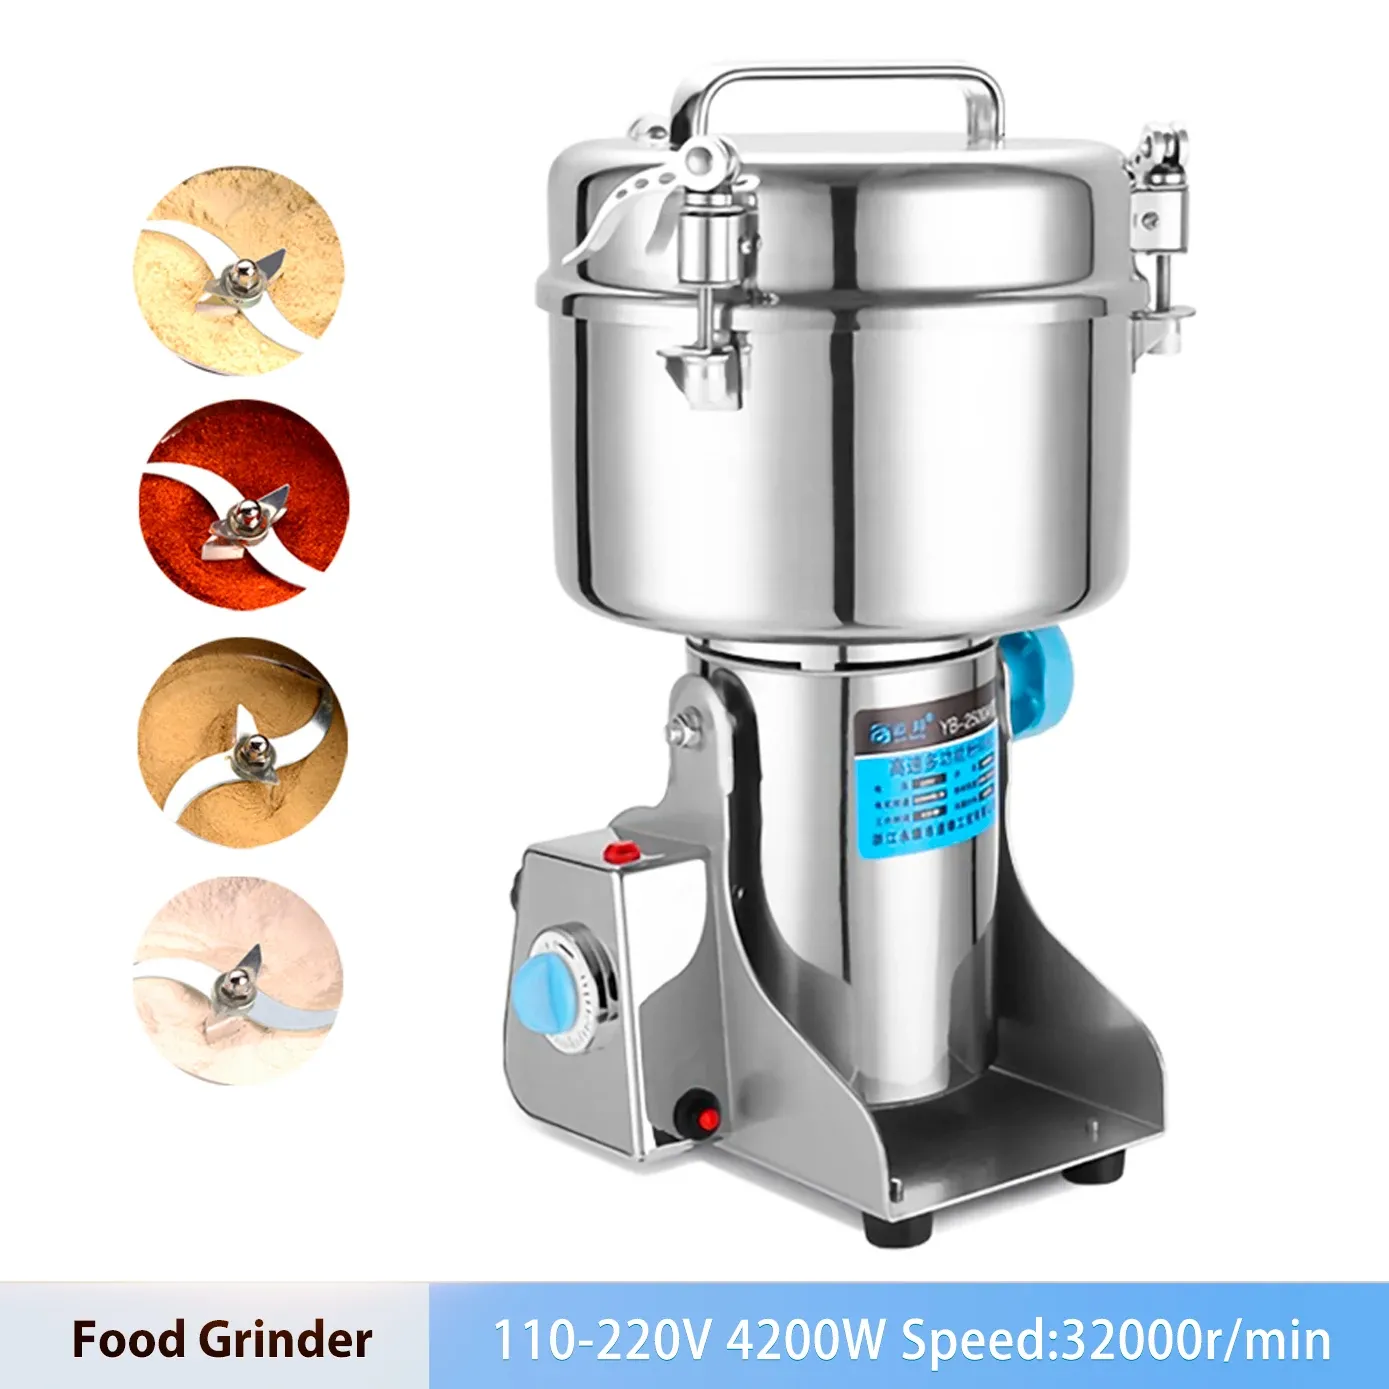 Grinders 2500g Electric Grains Spices Hebals Cereals Coffee Dry Food Grinder Mill Grinding Machine Gristmill Flour Powder Crusher